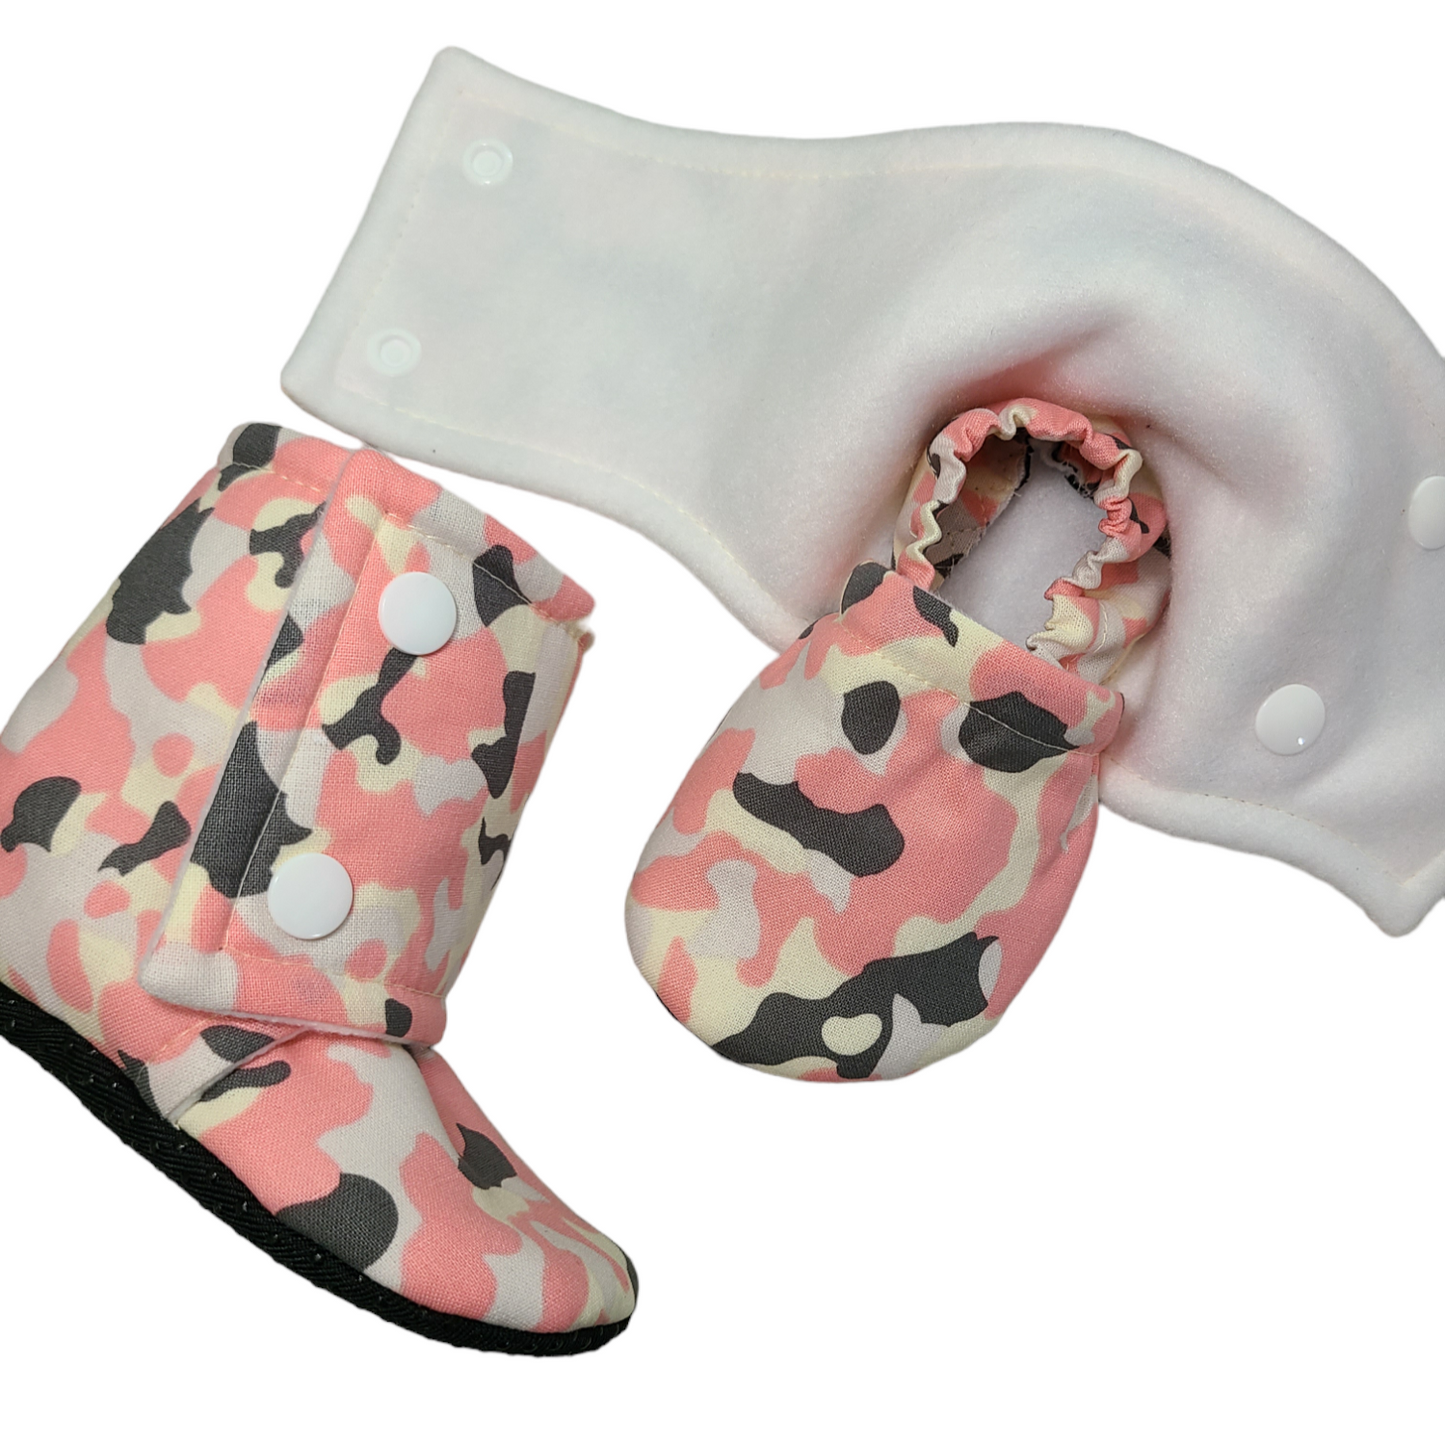 Camo Baby Booties, Pink Camo Baby Gift, Baby Moccs, Baby Booties, Camo Baby Slippers, Camouflage Baby Shoes